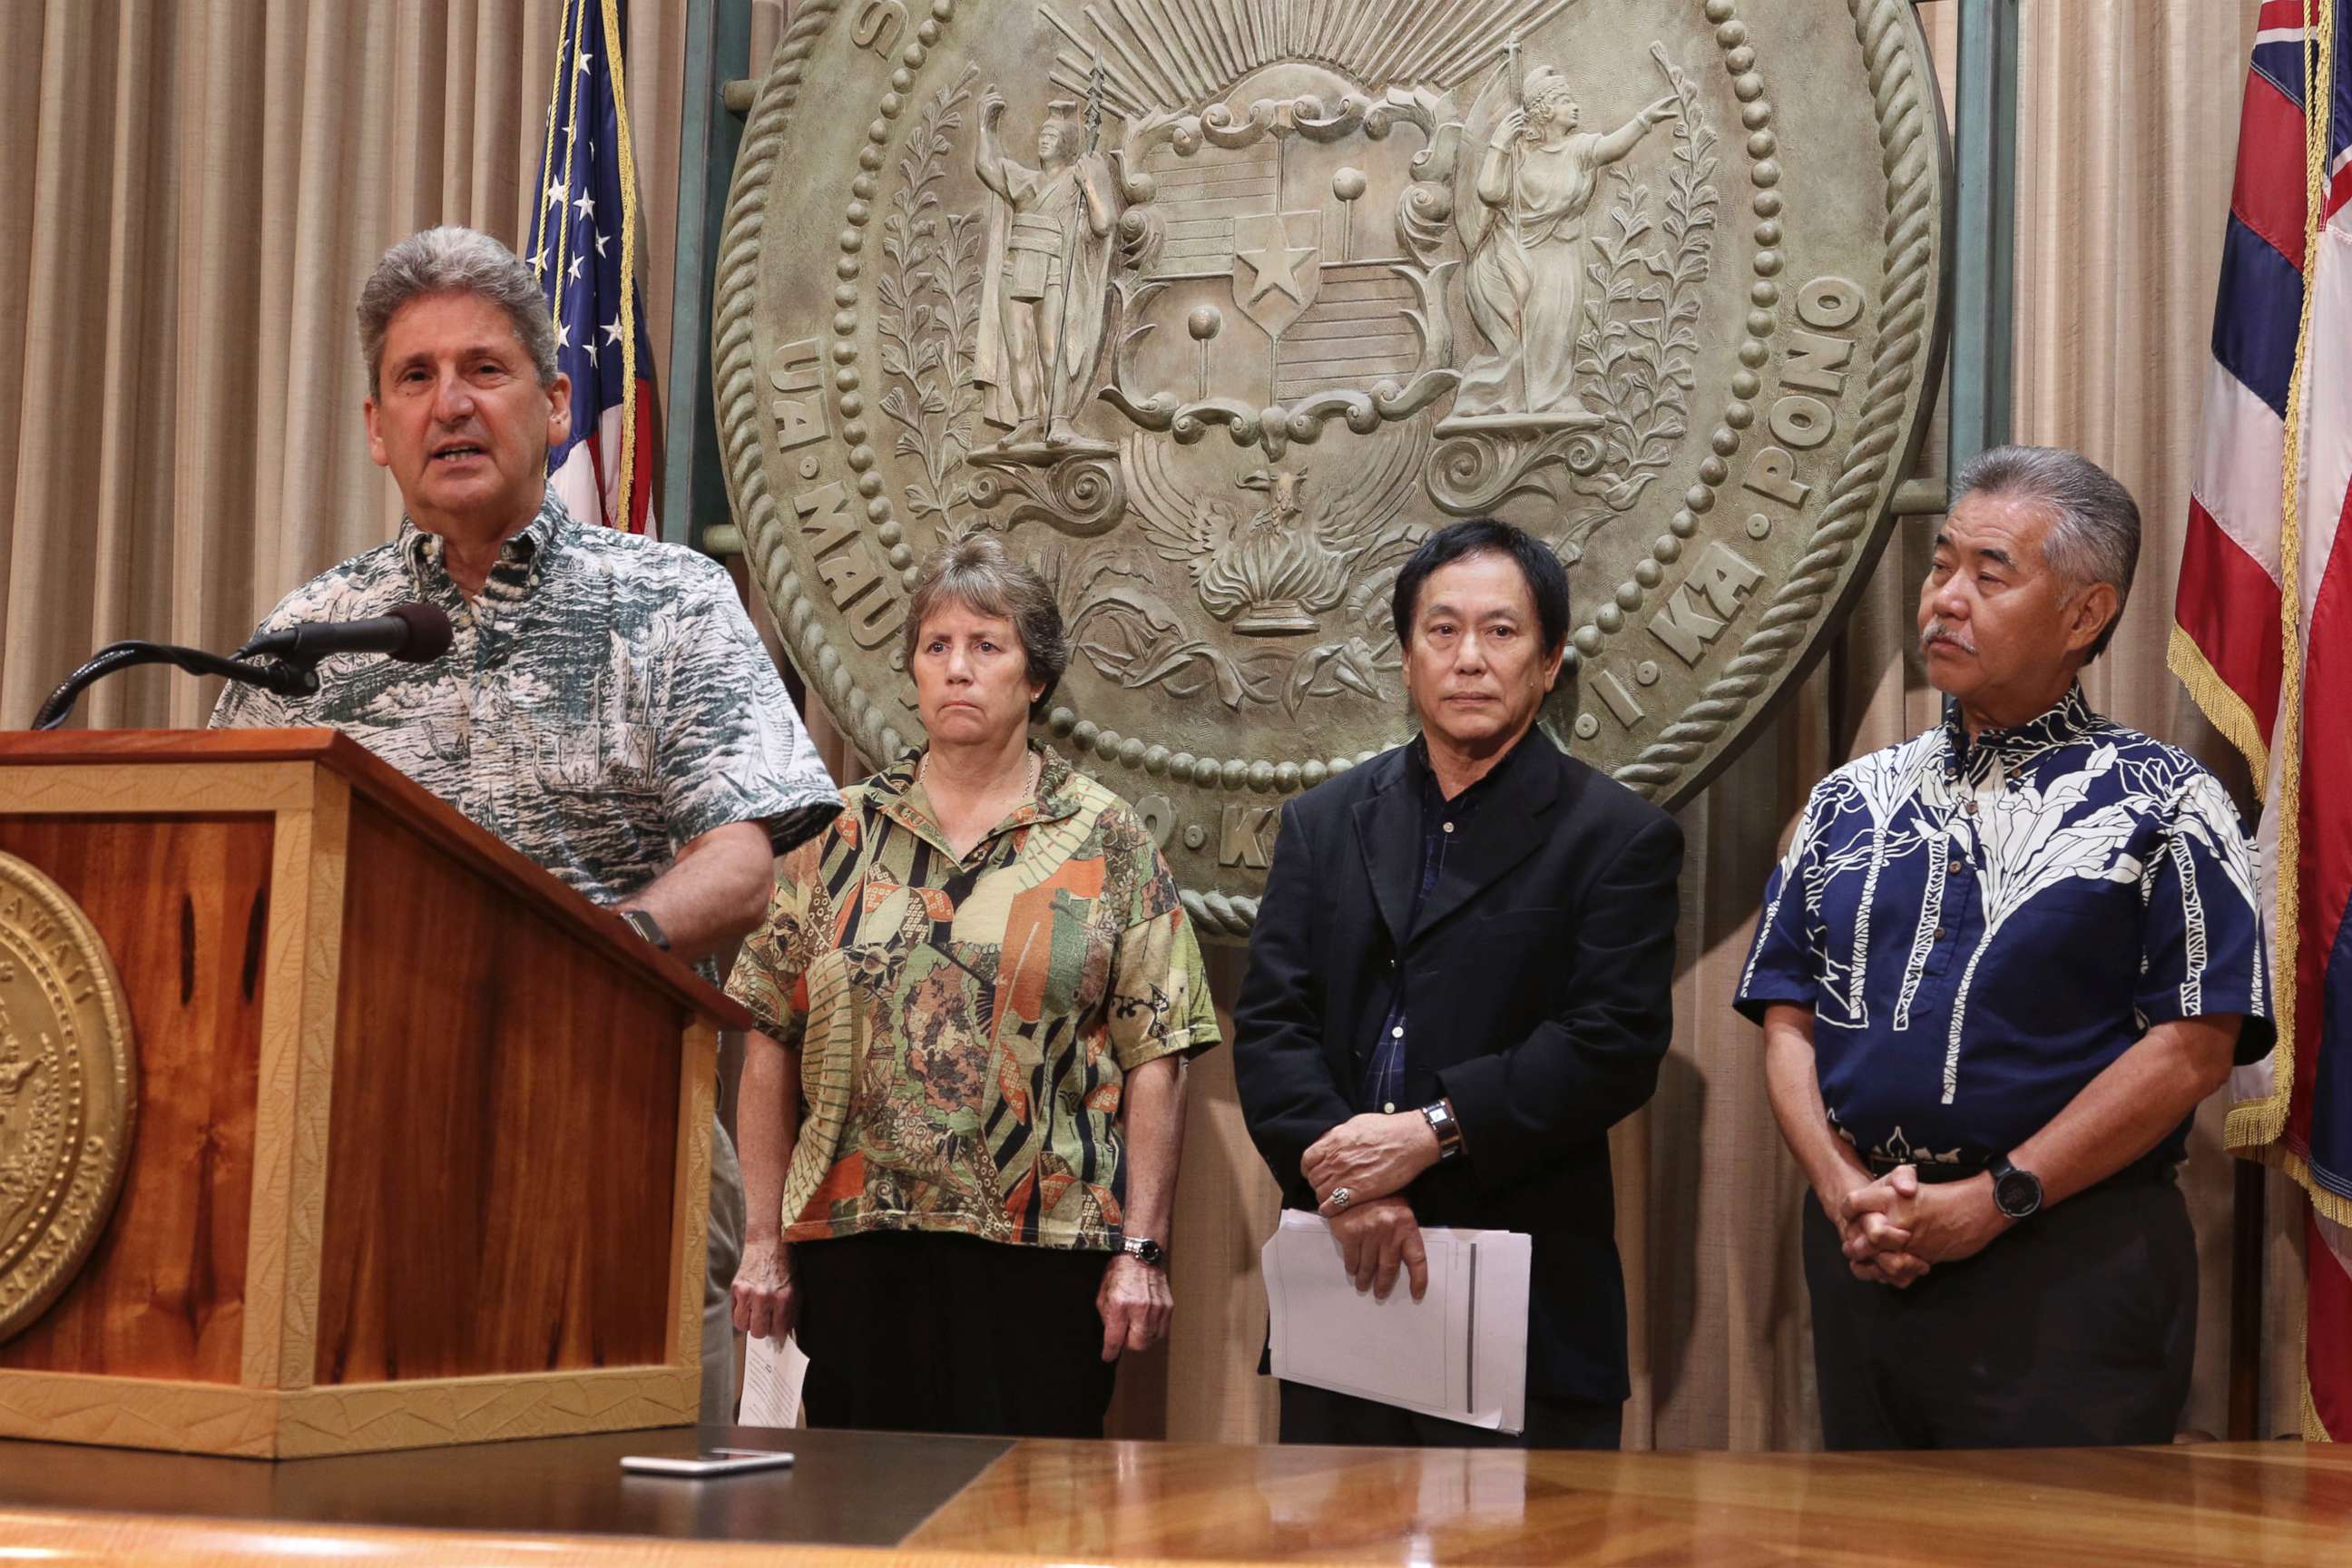 PHOTO: University of Hawaii President David Lassner, left, speaks at a news conference, Oct. 30, 2018 in Honolulu regarding a Hawaii Supreme Court ruling upholding a decision to grant a permit for the the Thirty Meter Telescope on Mauna Kea.